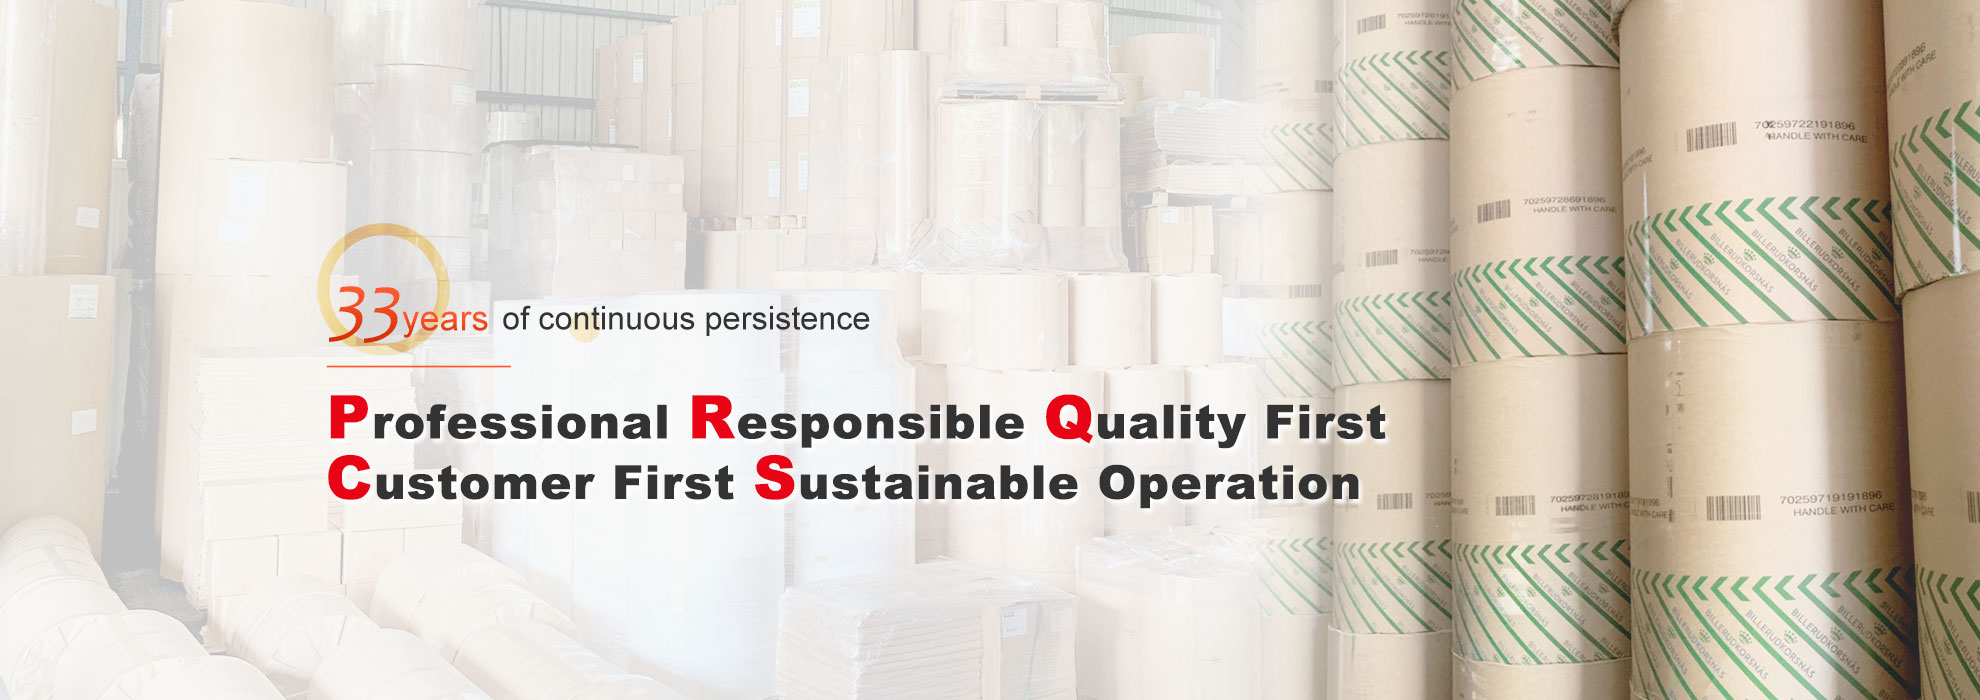 In the spirit of professionalism, responsibility, quality first, service and sustainable operation.